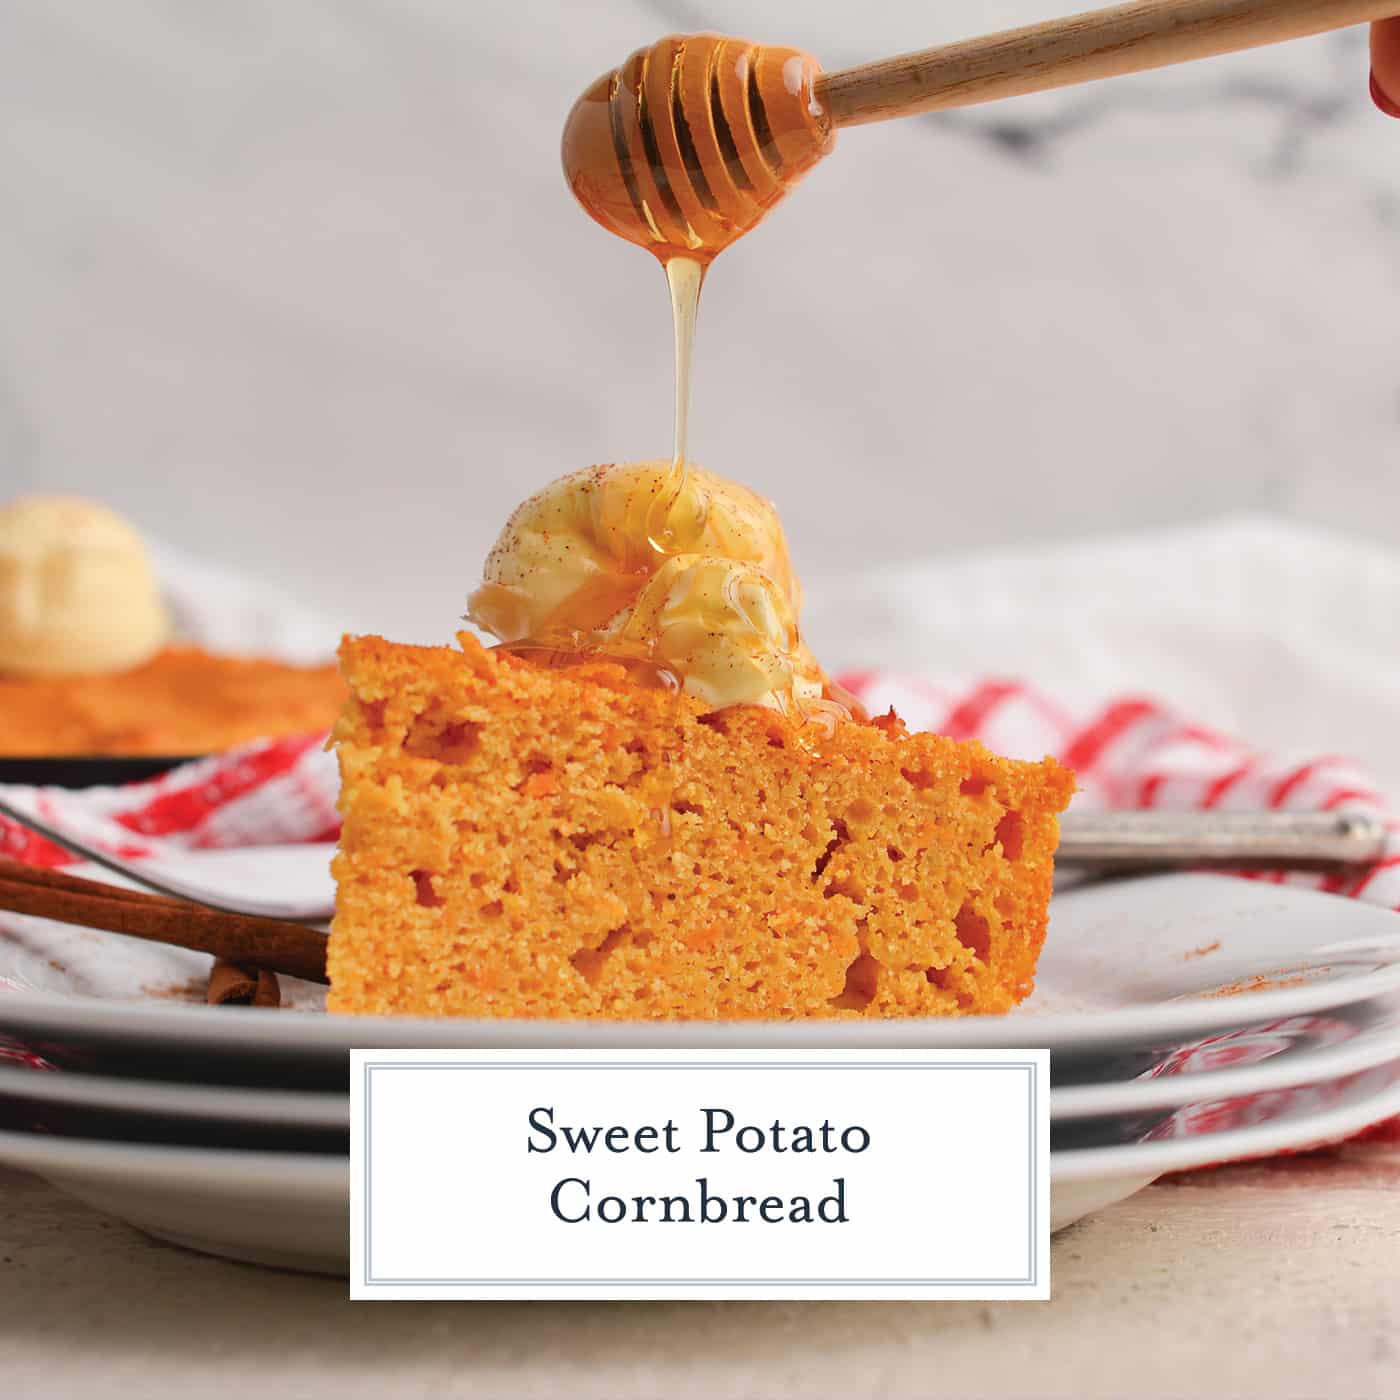 honey drizzled on slice of sweet potato cornbread with text overlay for facebook